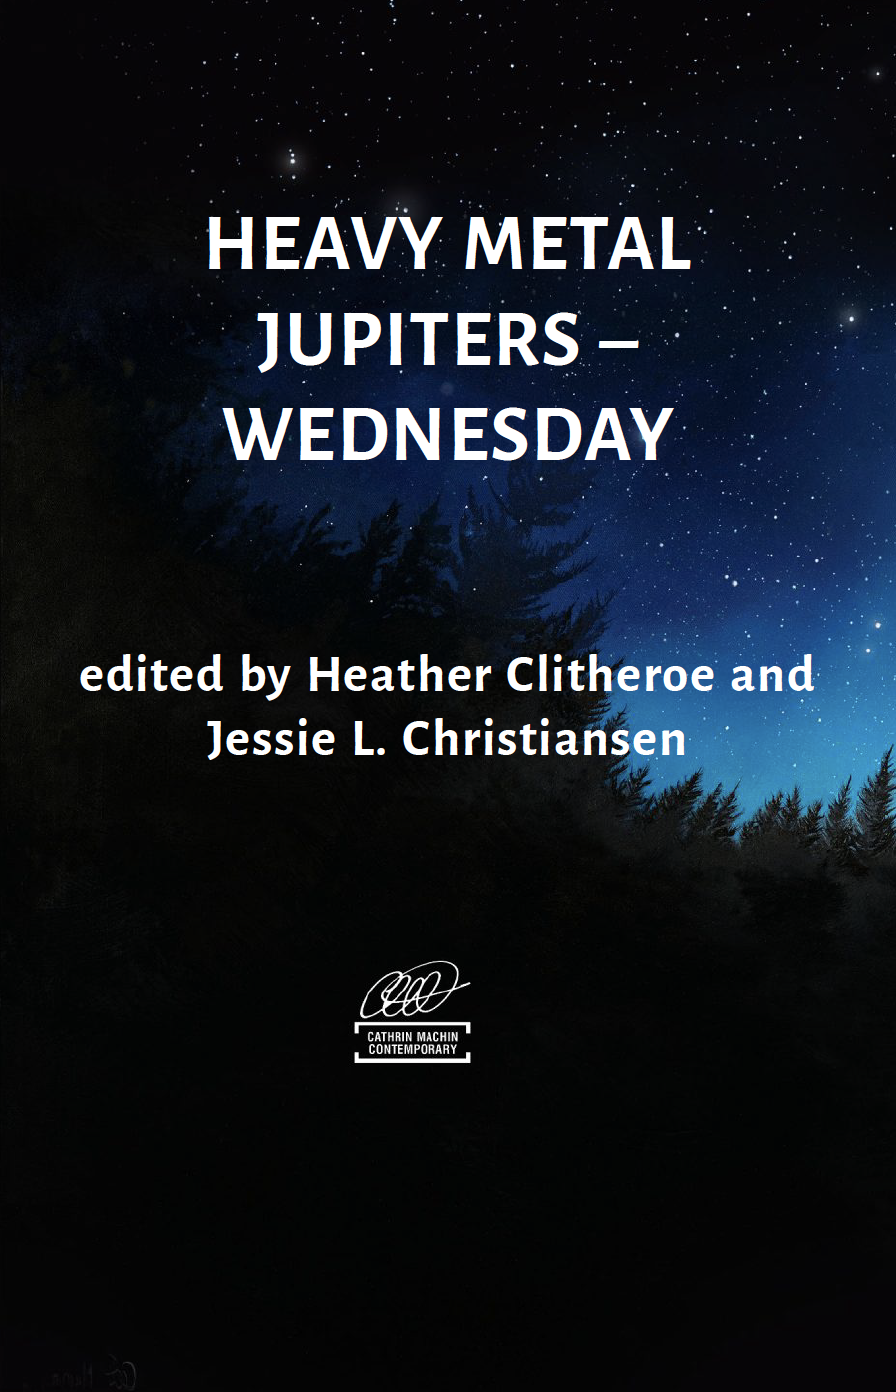 Heavy Metal Jupiters and Other Places - Wednesday